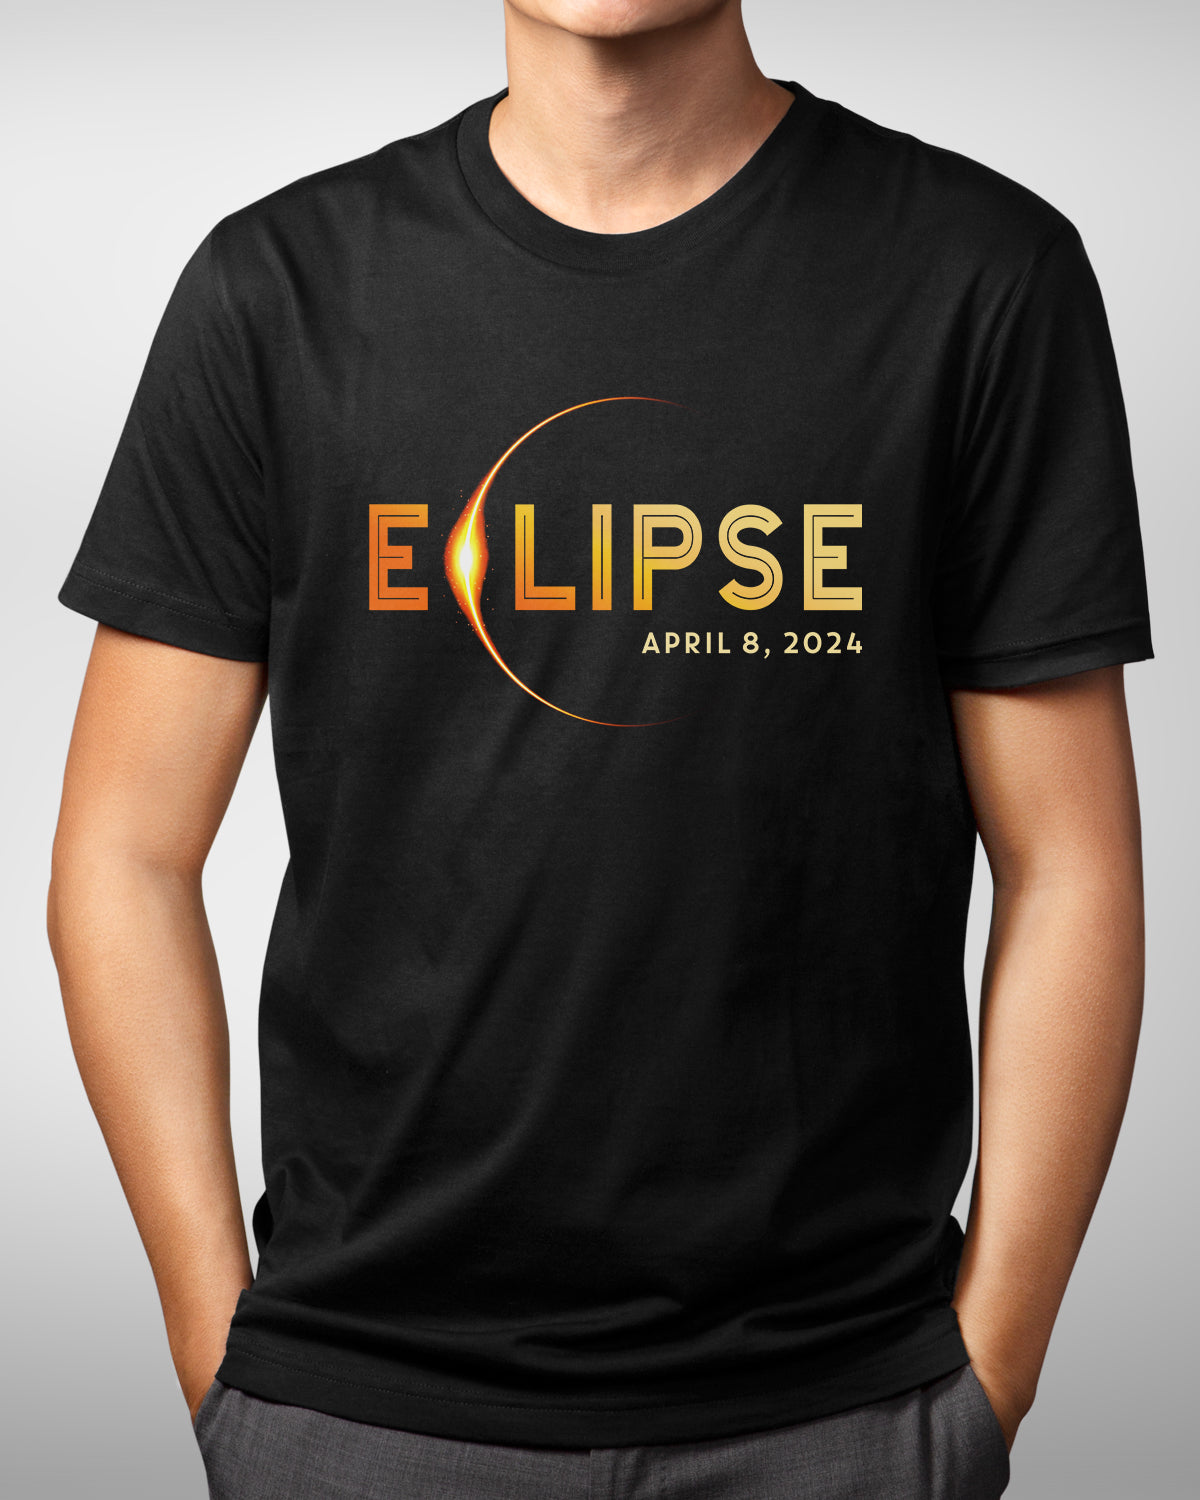 2024 North American Total Solar Eclipse T-Shirt - April 8th Path of Eclipse Commemorative Tee